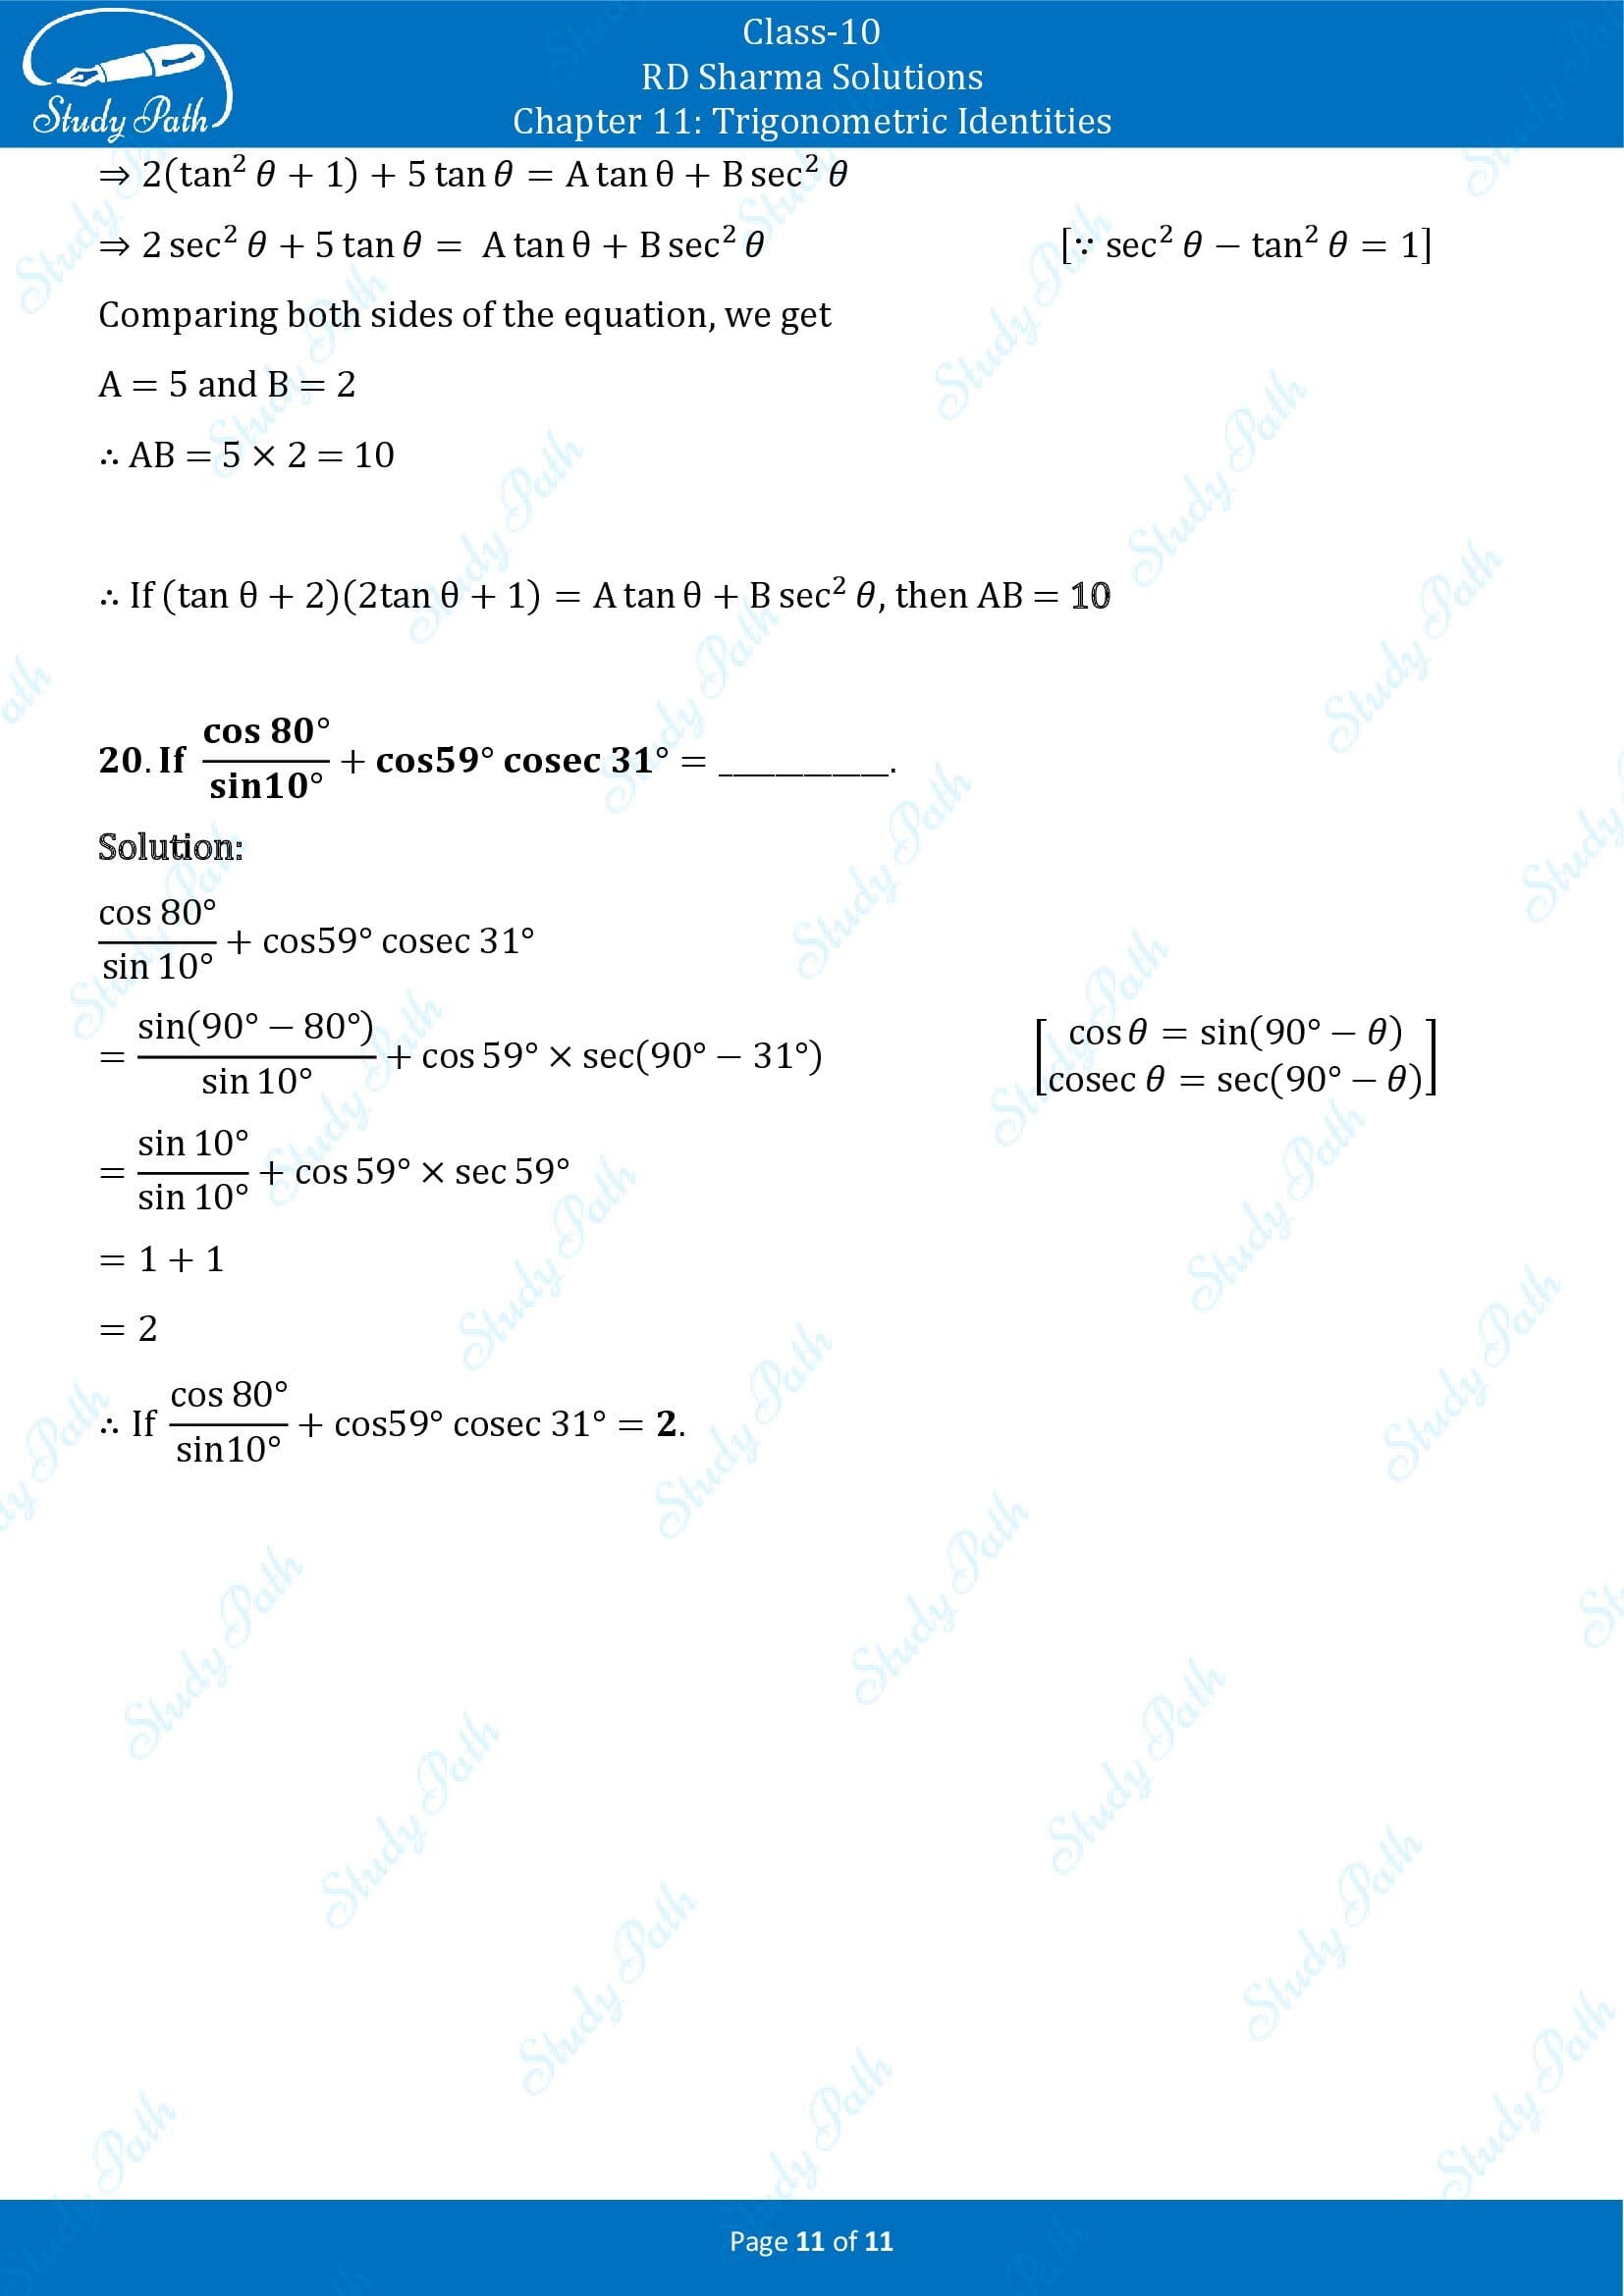 RD Sharma Solutions Class 10 Chapter 11 Trigonometric Identities Fill in the Blank Type Questions FBQs 00011